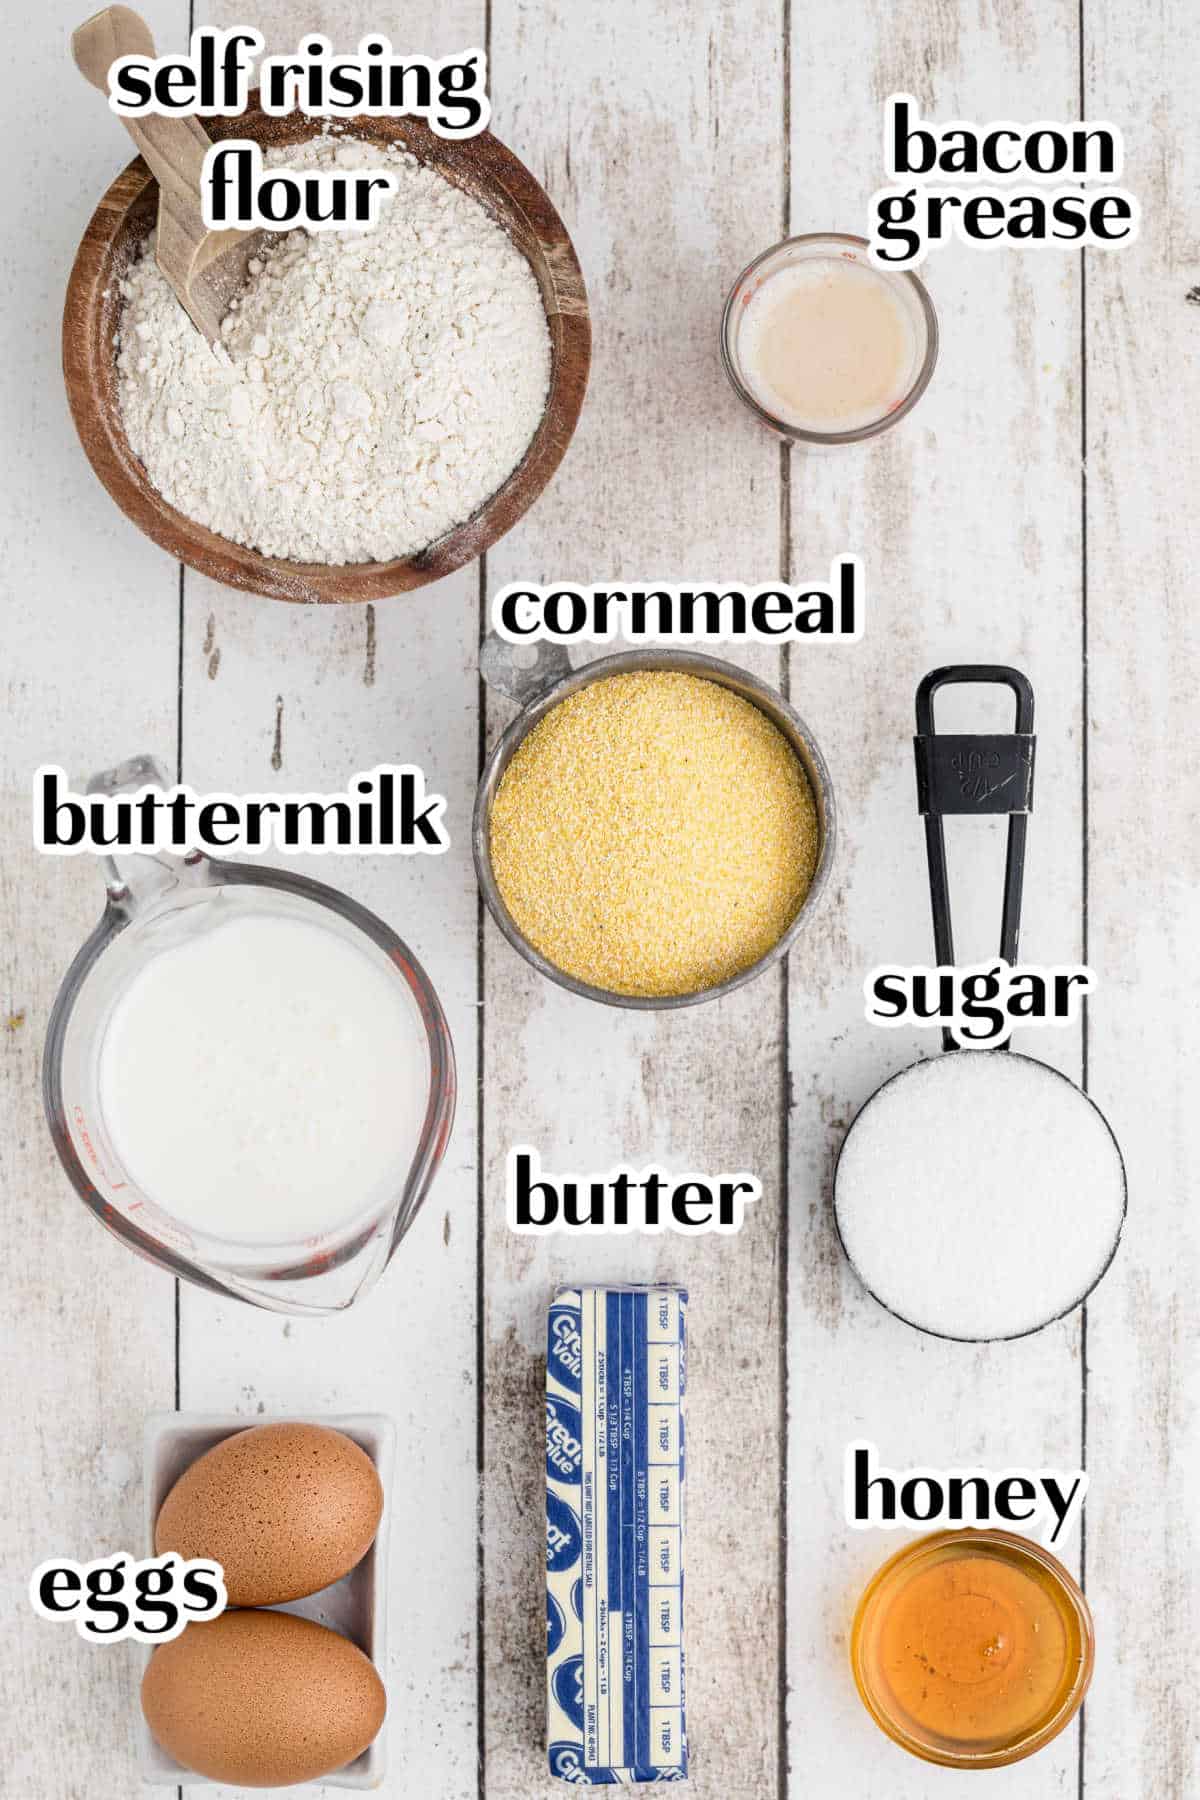 Labeled ingredients for these cornmeal muffins.